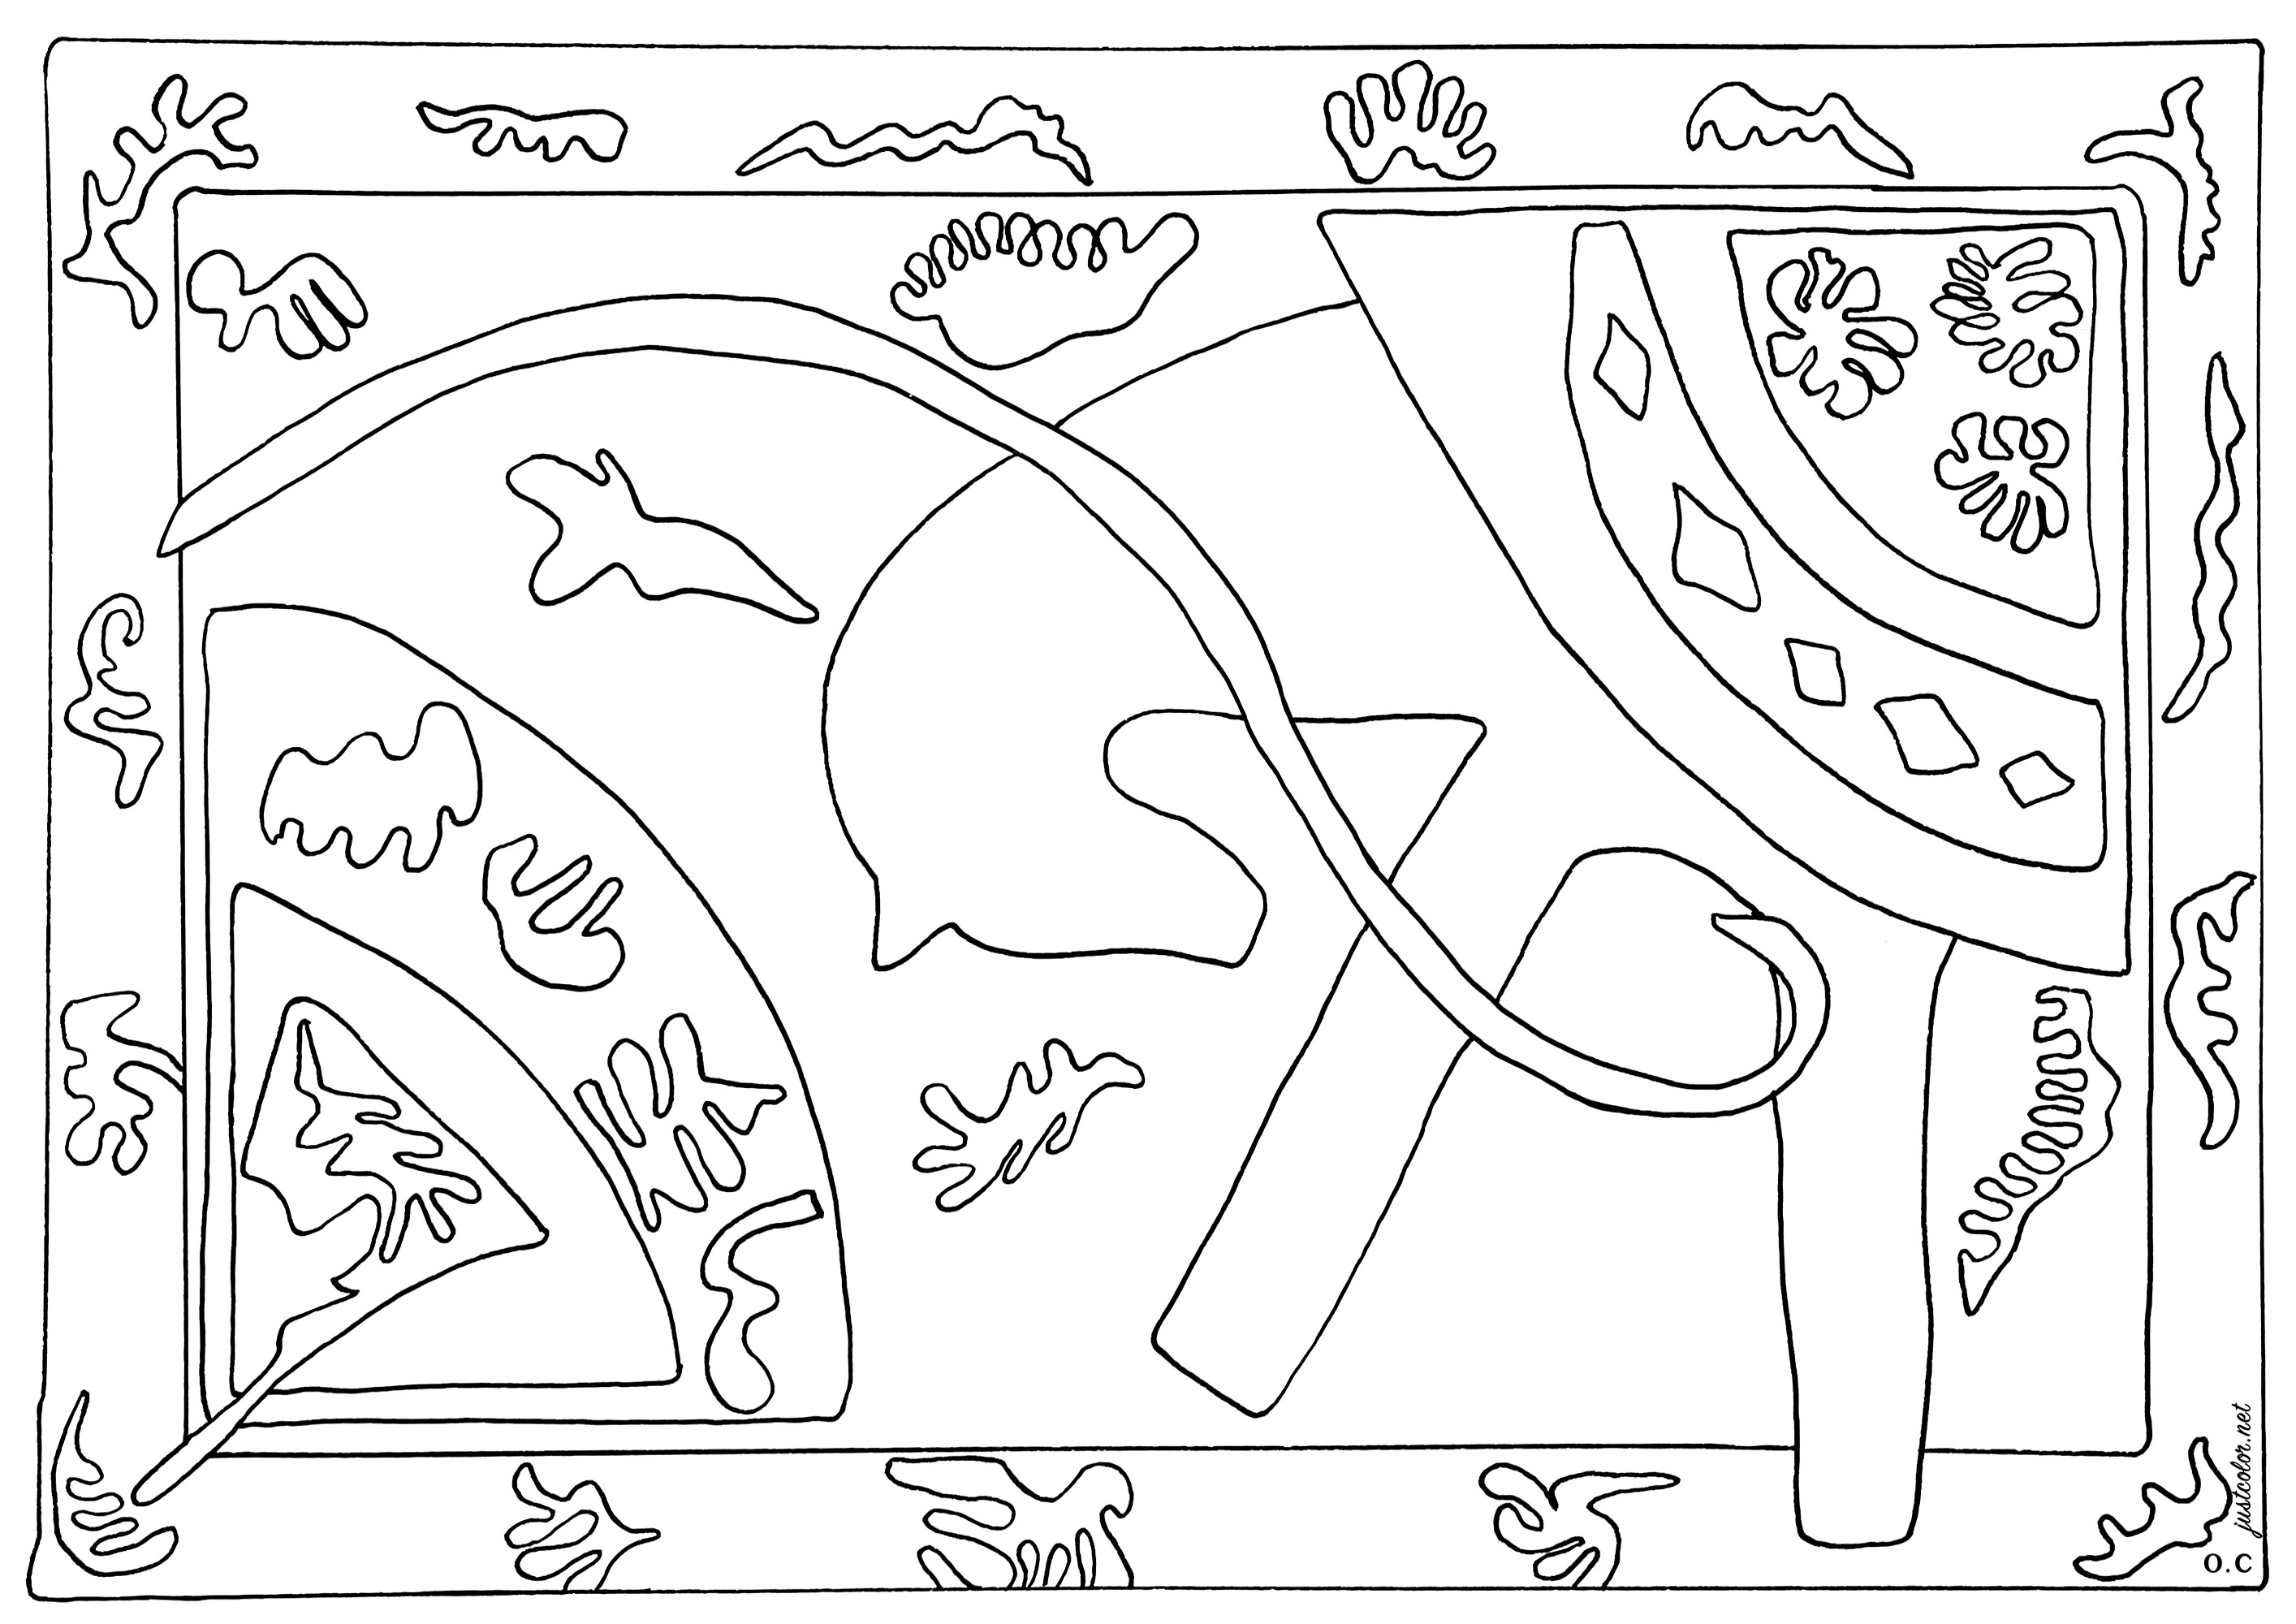 Coloring page created from Henri Matisse's illustration 'The Horse, The Rider and the Clown' for his illustration book Jazz (1947). 'Of all Matisse's books, Jazz is undoubtedly the most important; it provokes a real revolution in the work of the artist and in the history of contemporary art... The war had darkened Paris and the rare lights which filtered by the windows appeared like miraculous jewels. It is this impression which Matisse had wanted to give by making these brightly colored stars burst on a black background' (Tribute to Tériade). Matisse noted of the illustrations: 'drawing with scissors. Cutting raw in color reminds me of the direct carving of sculptors'.